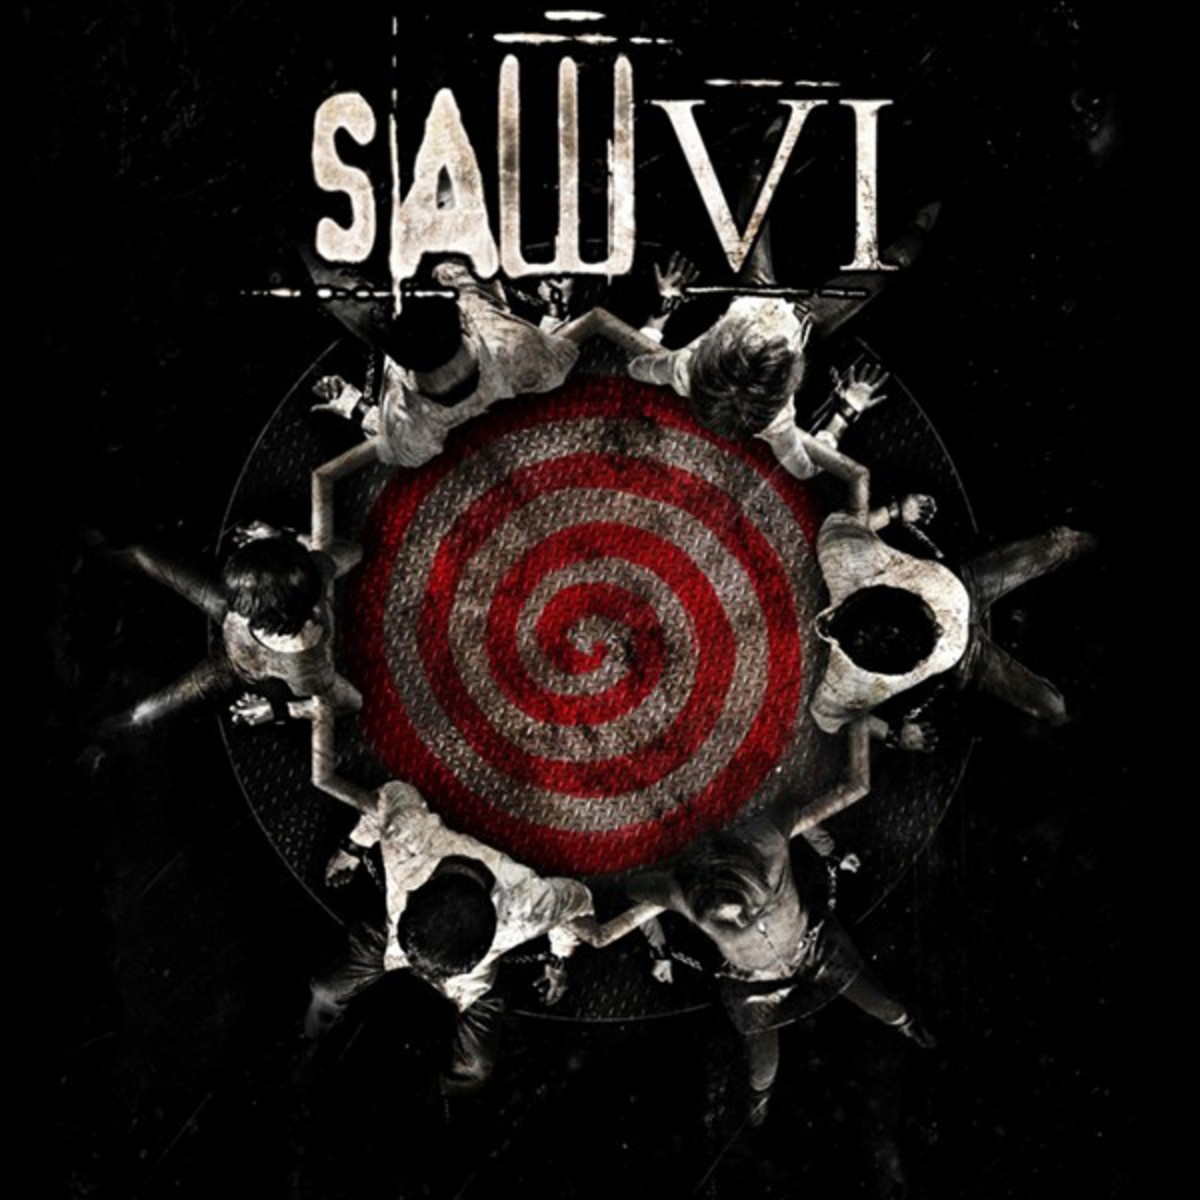 Saw VI (Soundtrack from the Motion Picture)